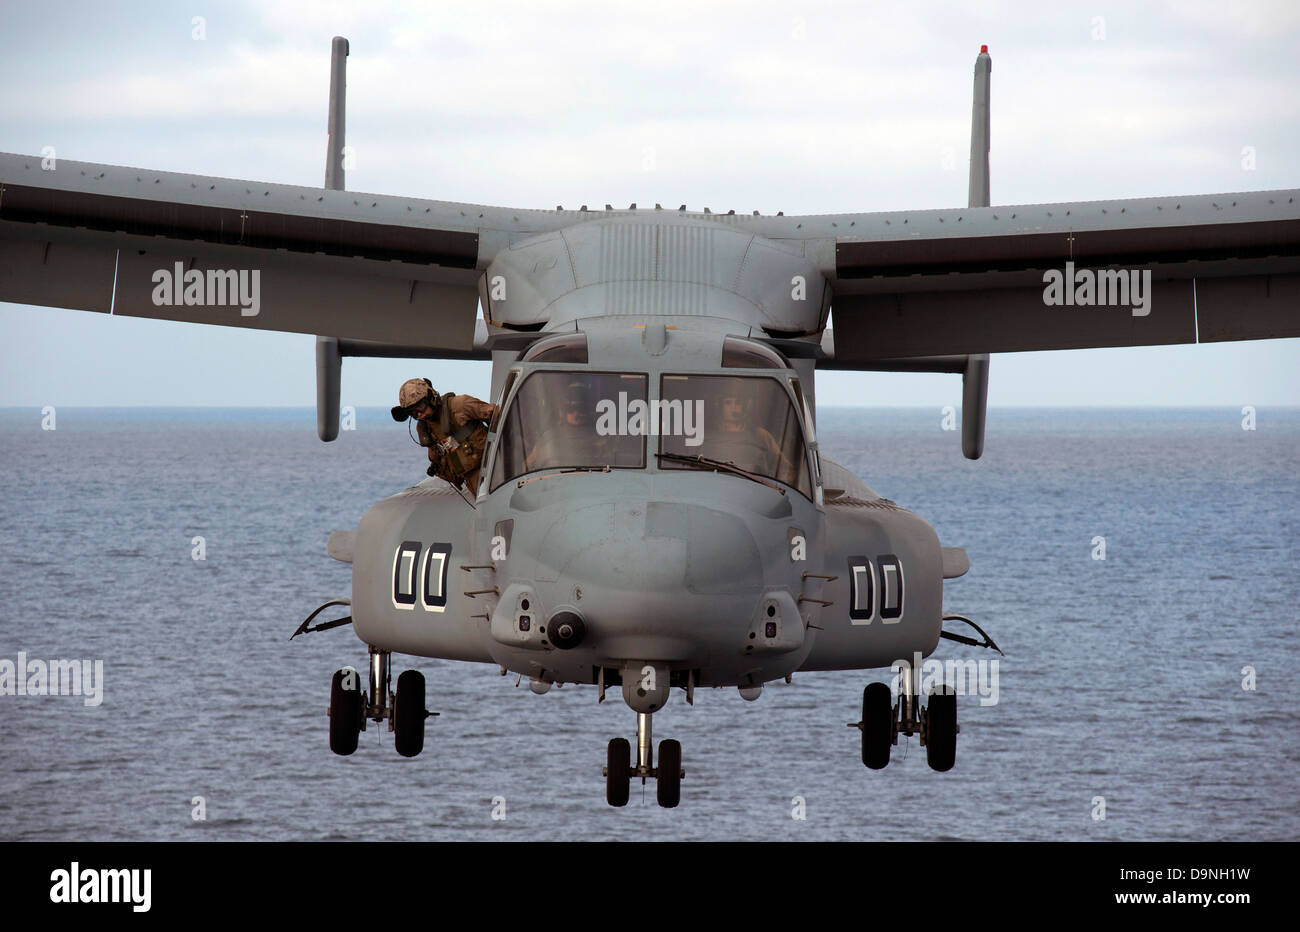 A US Marine Corps MV-22 Osprey tiltrotor aircraft approaches to land on the flight deck of the amphibious transport dock ship USS Anchorage April 22, 2013 in the Pacific Ocean. Stock Photo